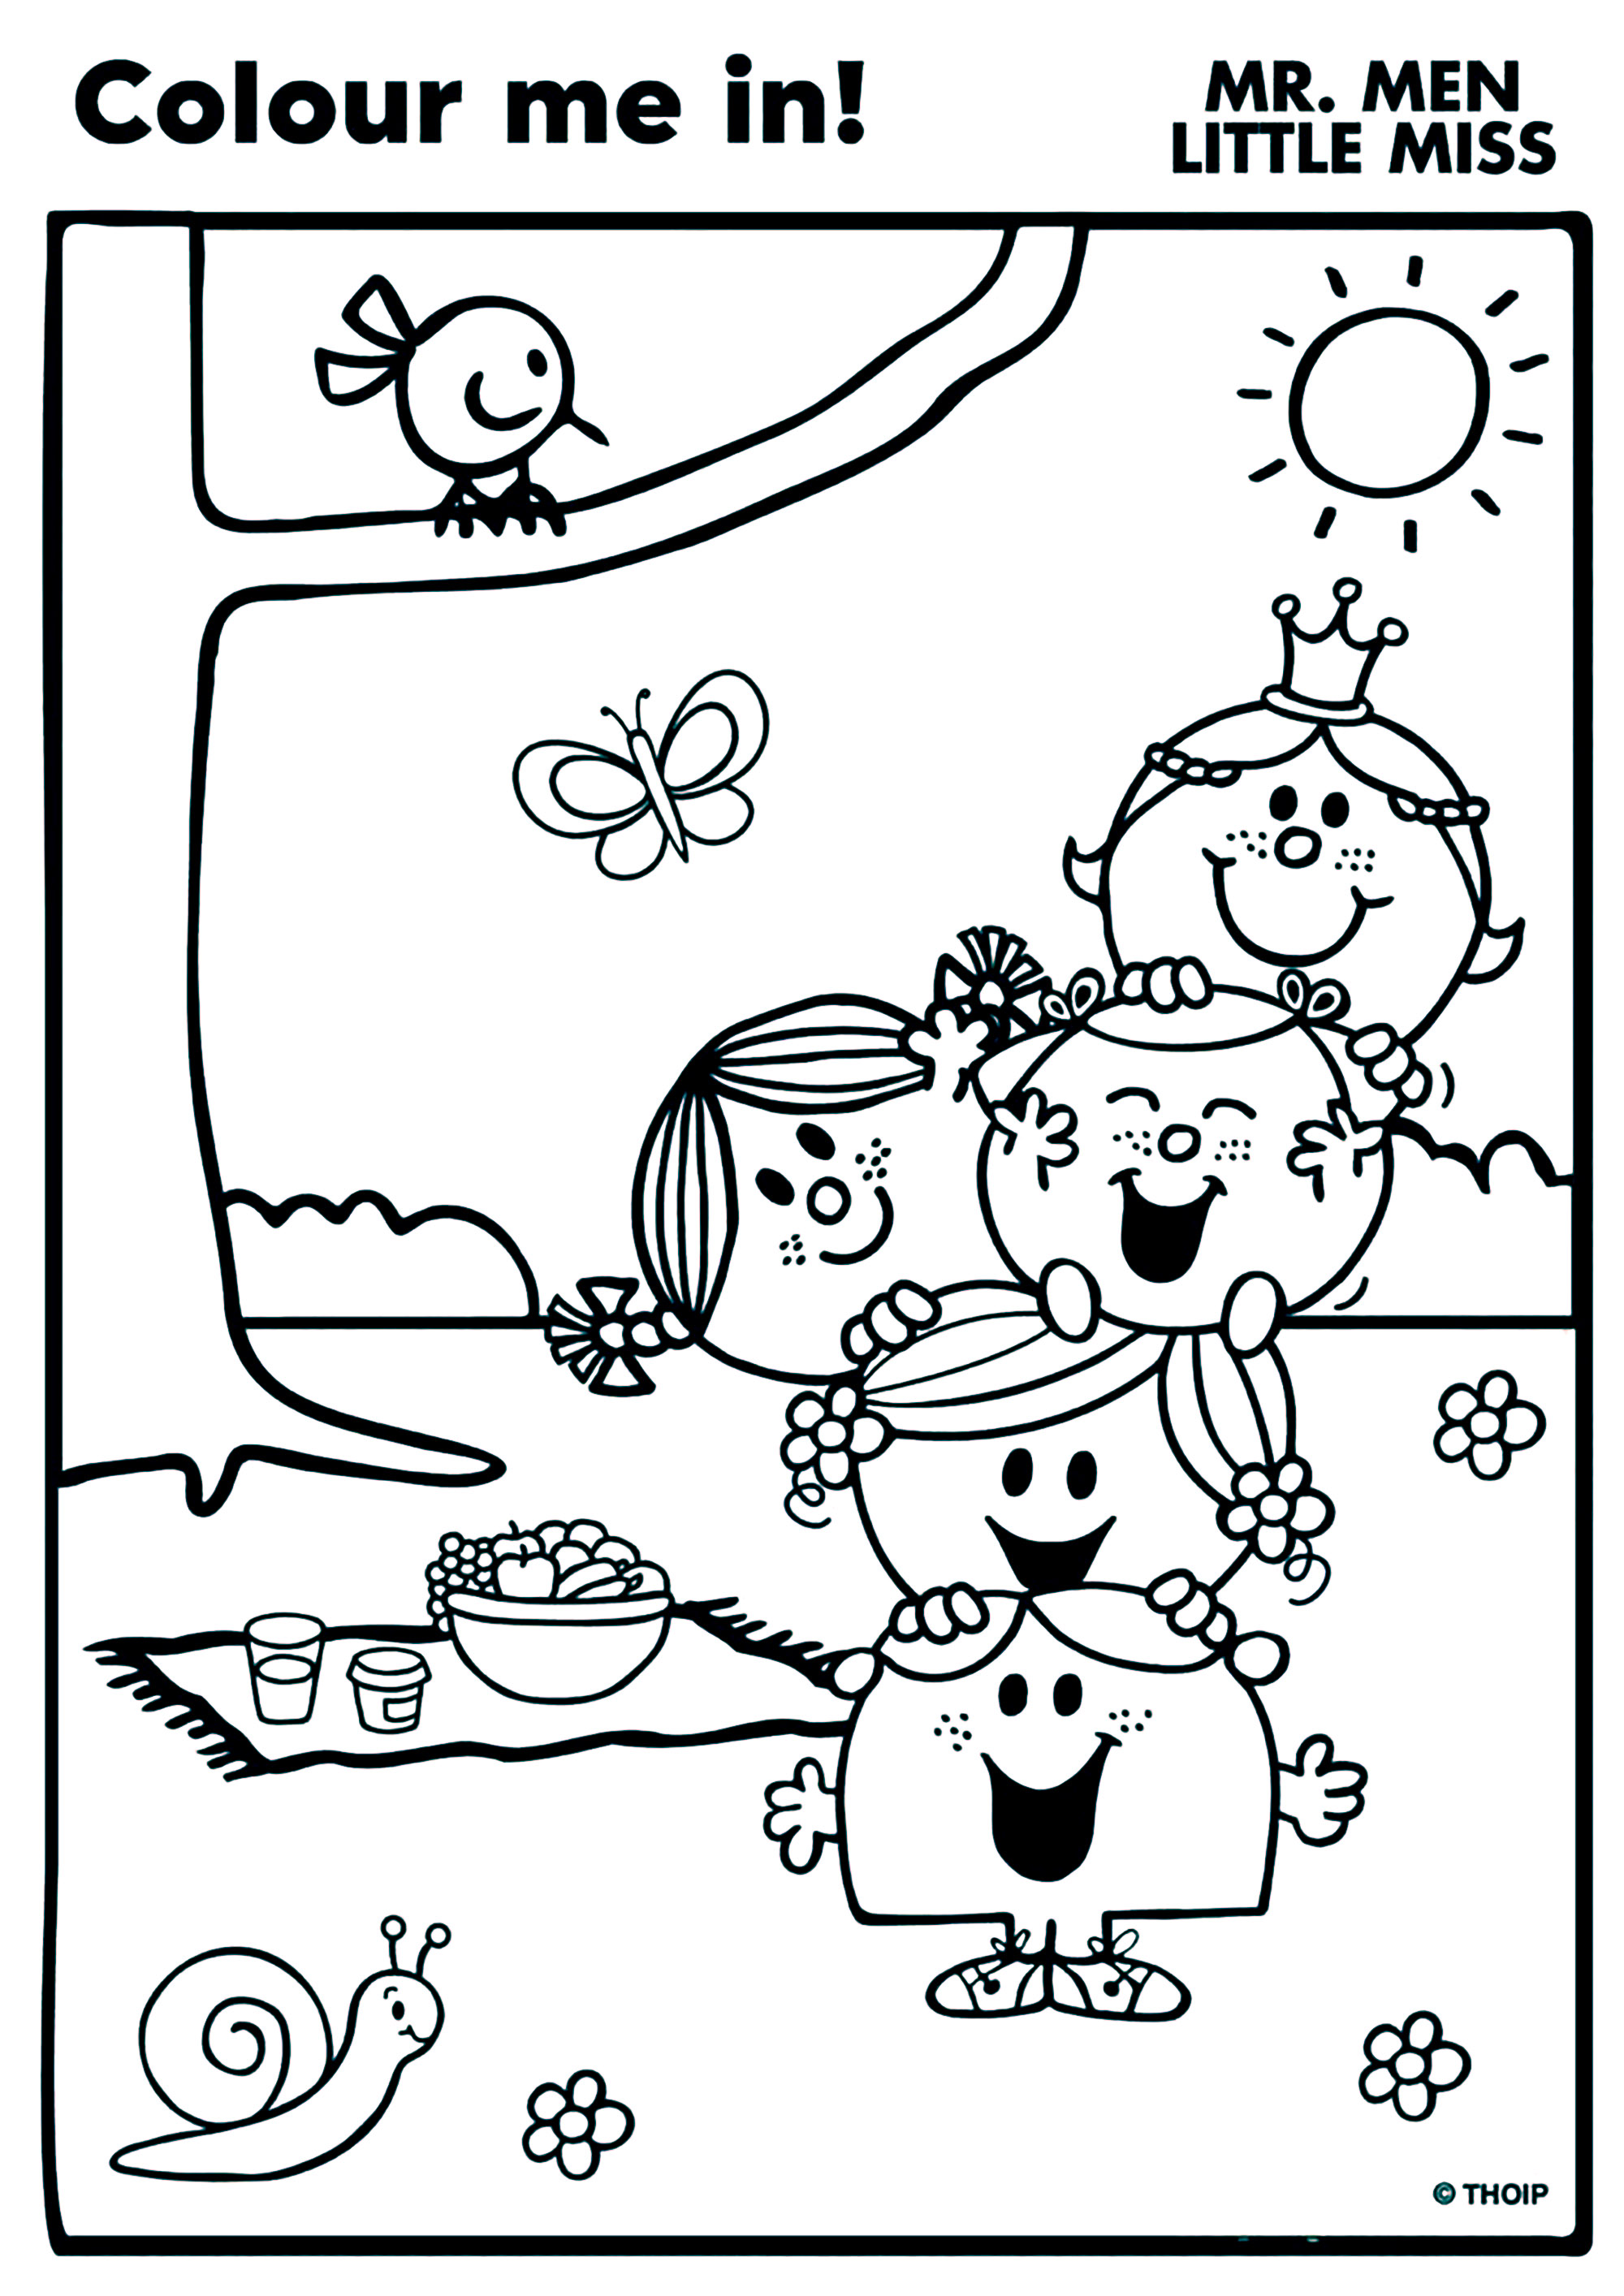 Mr. Men and Little Miss coloring: in the garden. Color the various characters with their unique characters